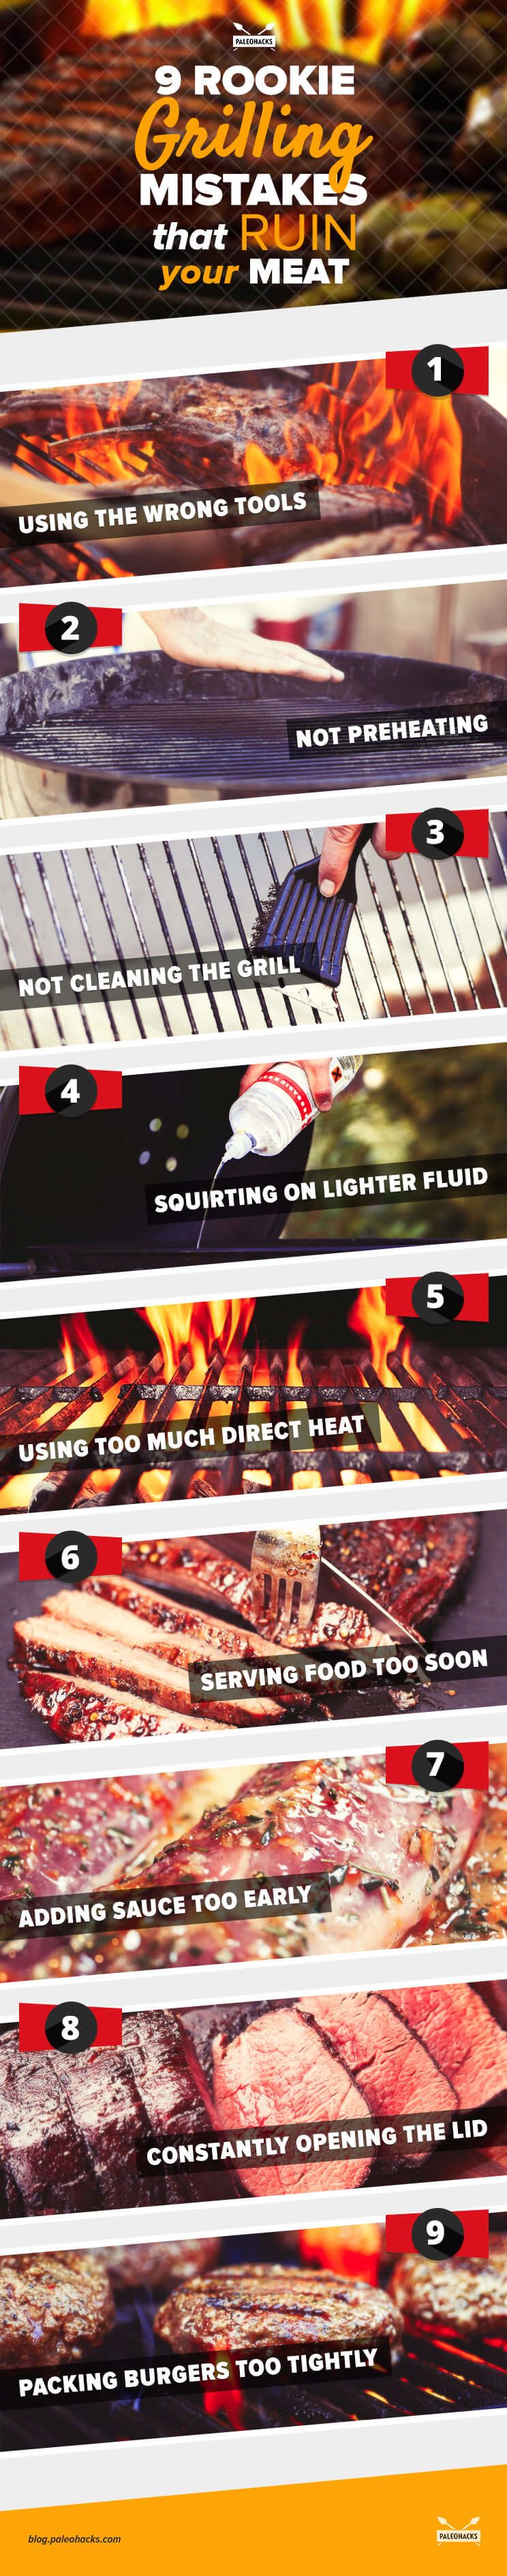 grilling mistakes infographic